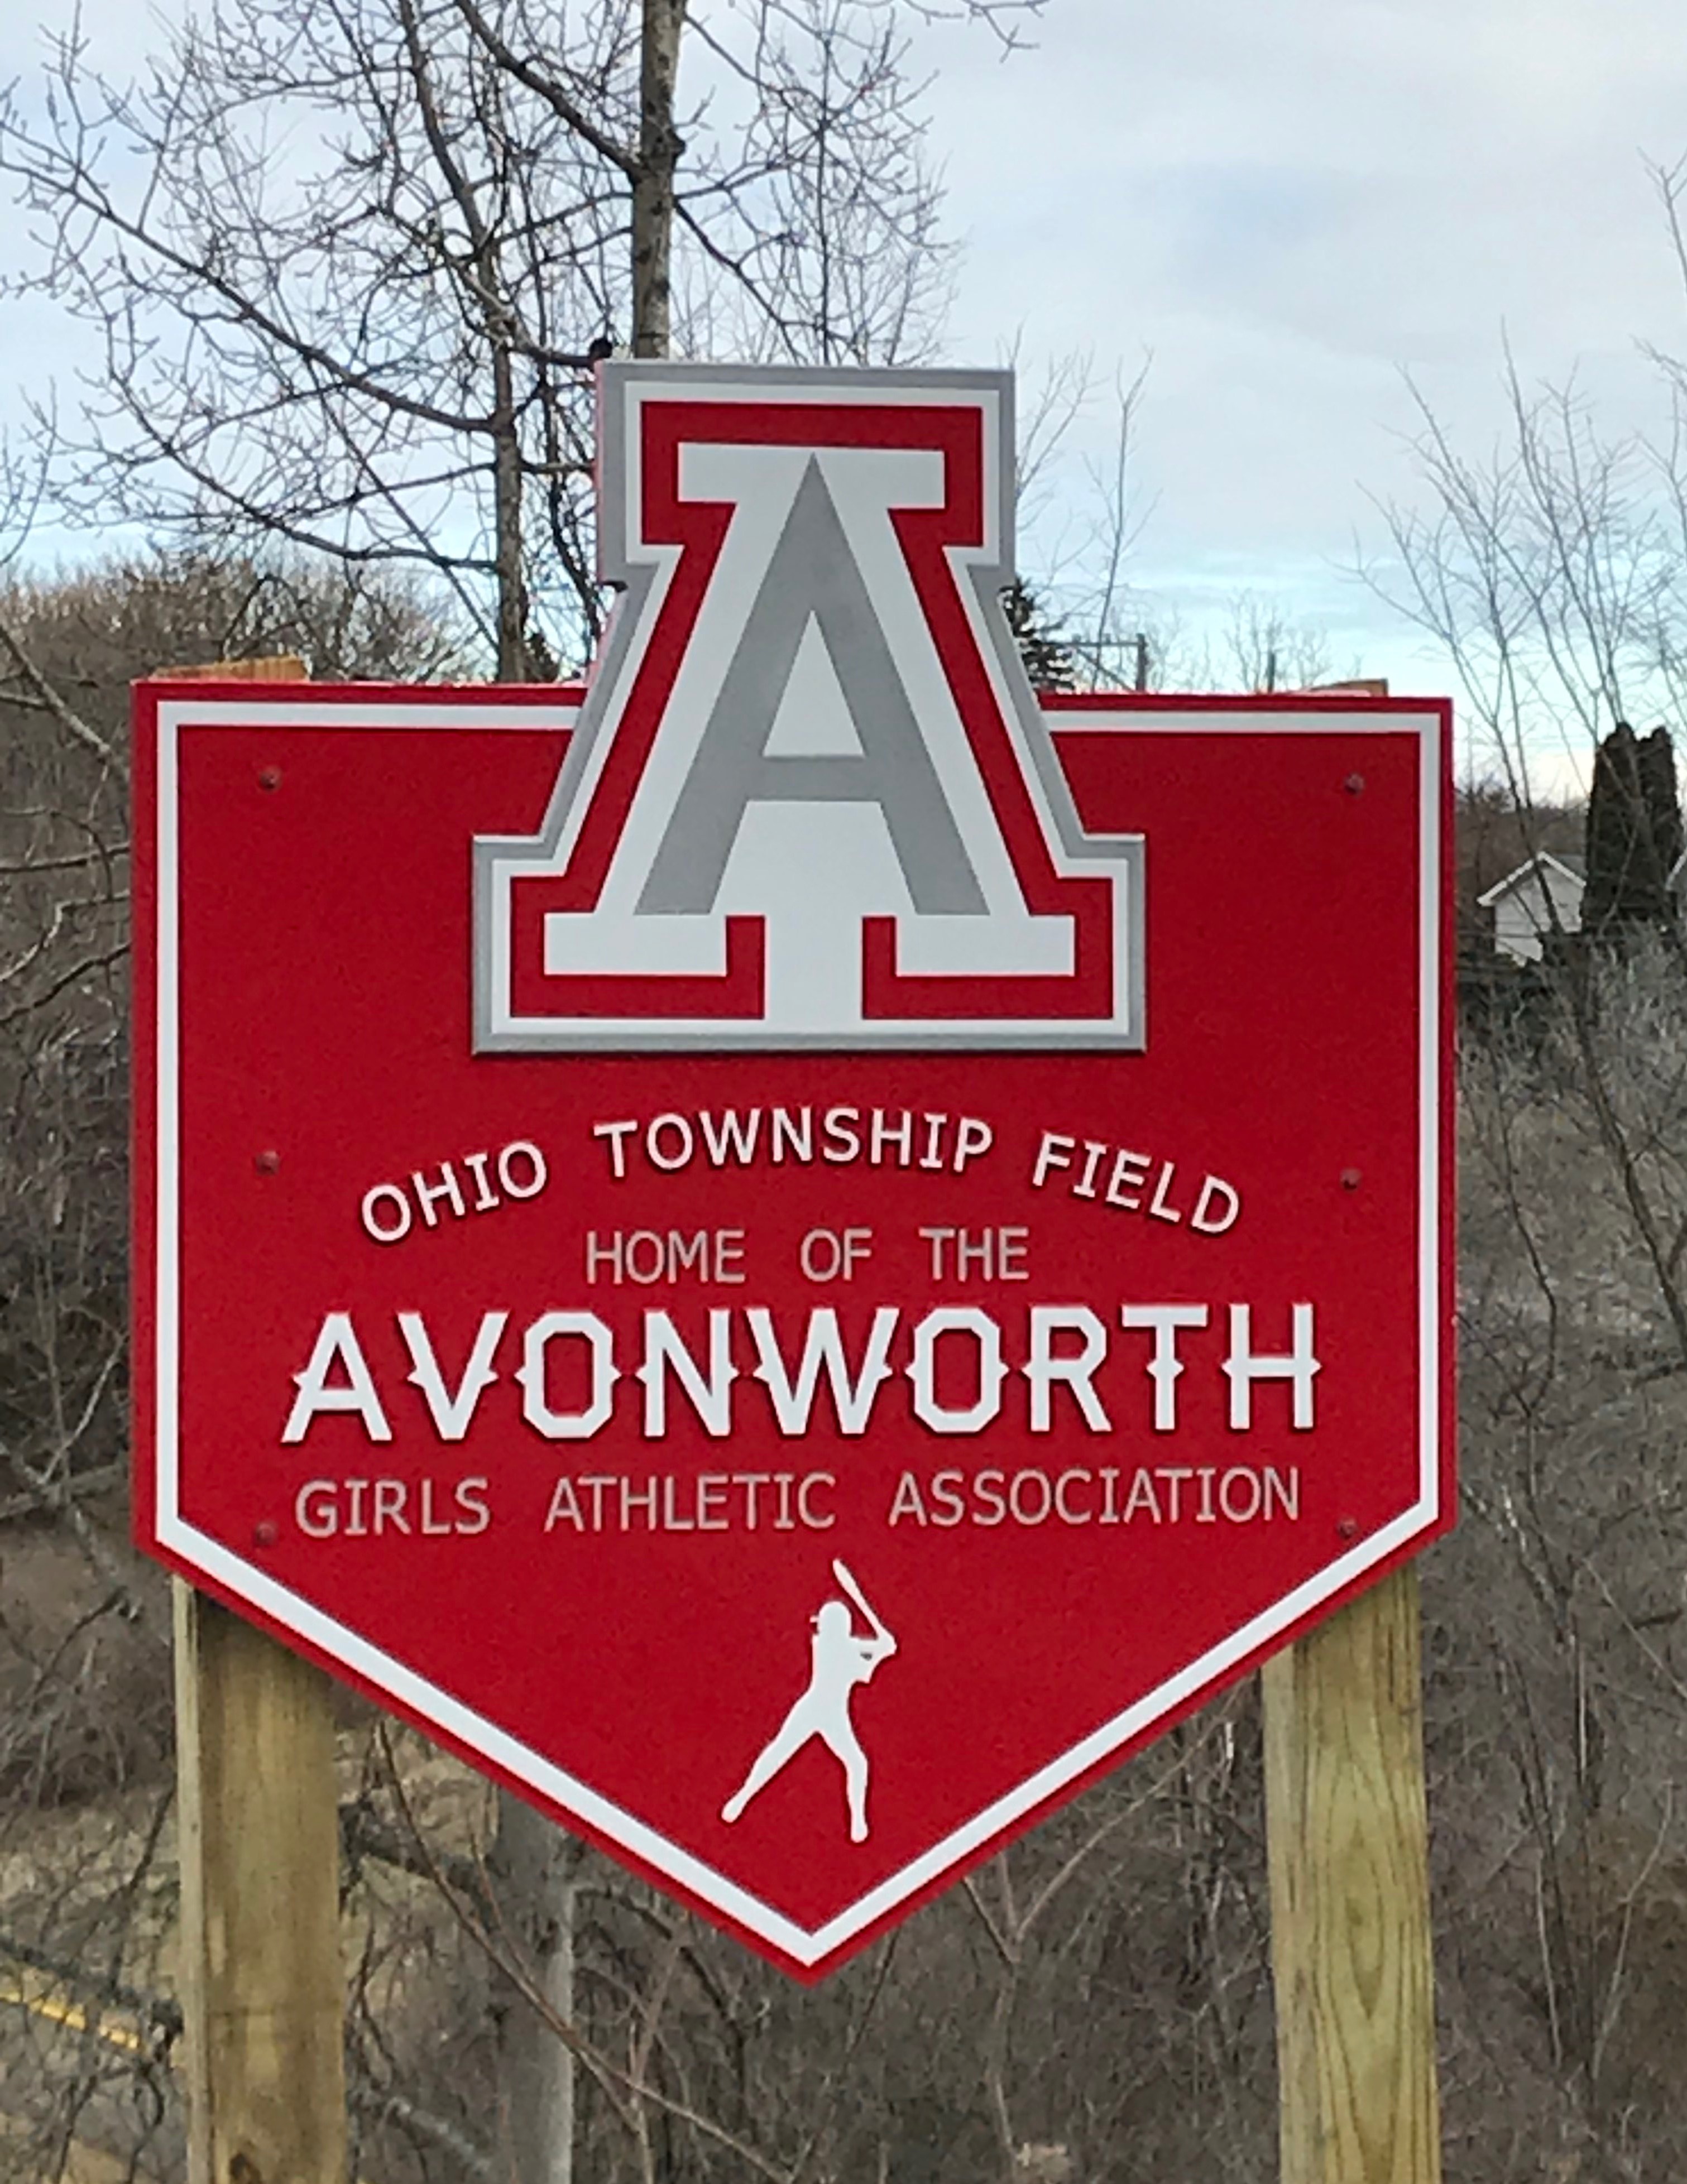 A sign for Ohio Township